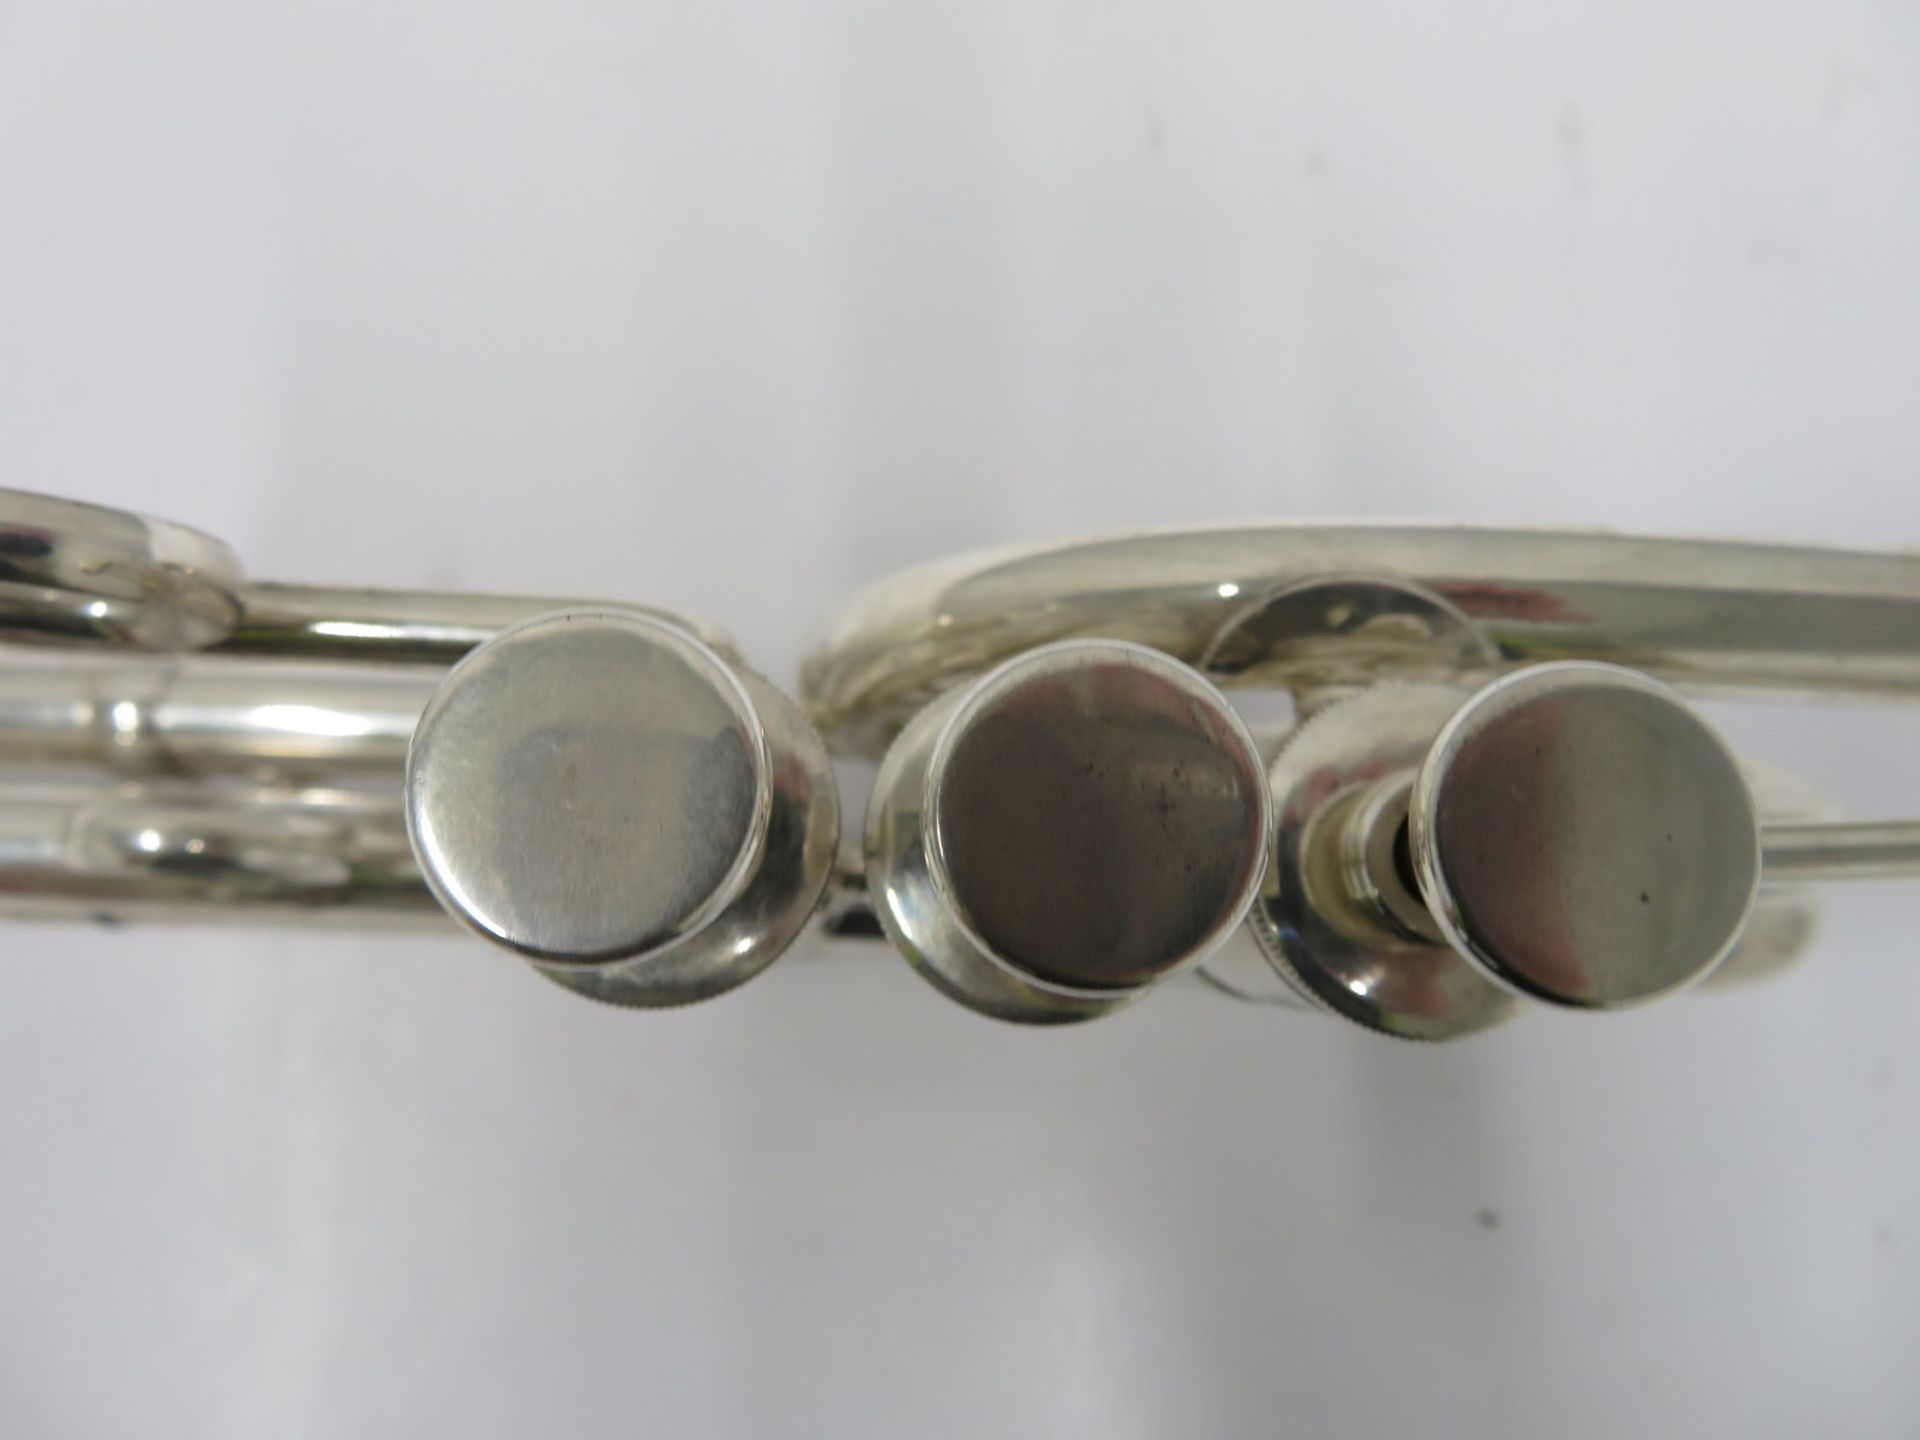 Smith-Watkins fanfare trumpet with case. Serial number: 787. - Image 10 of 14